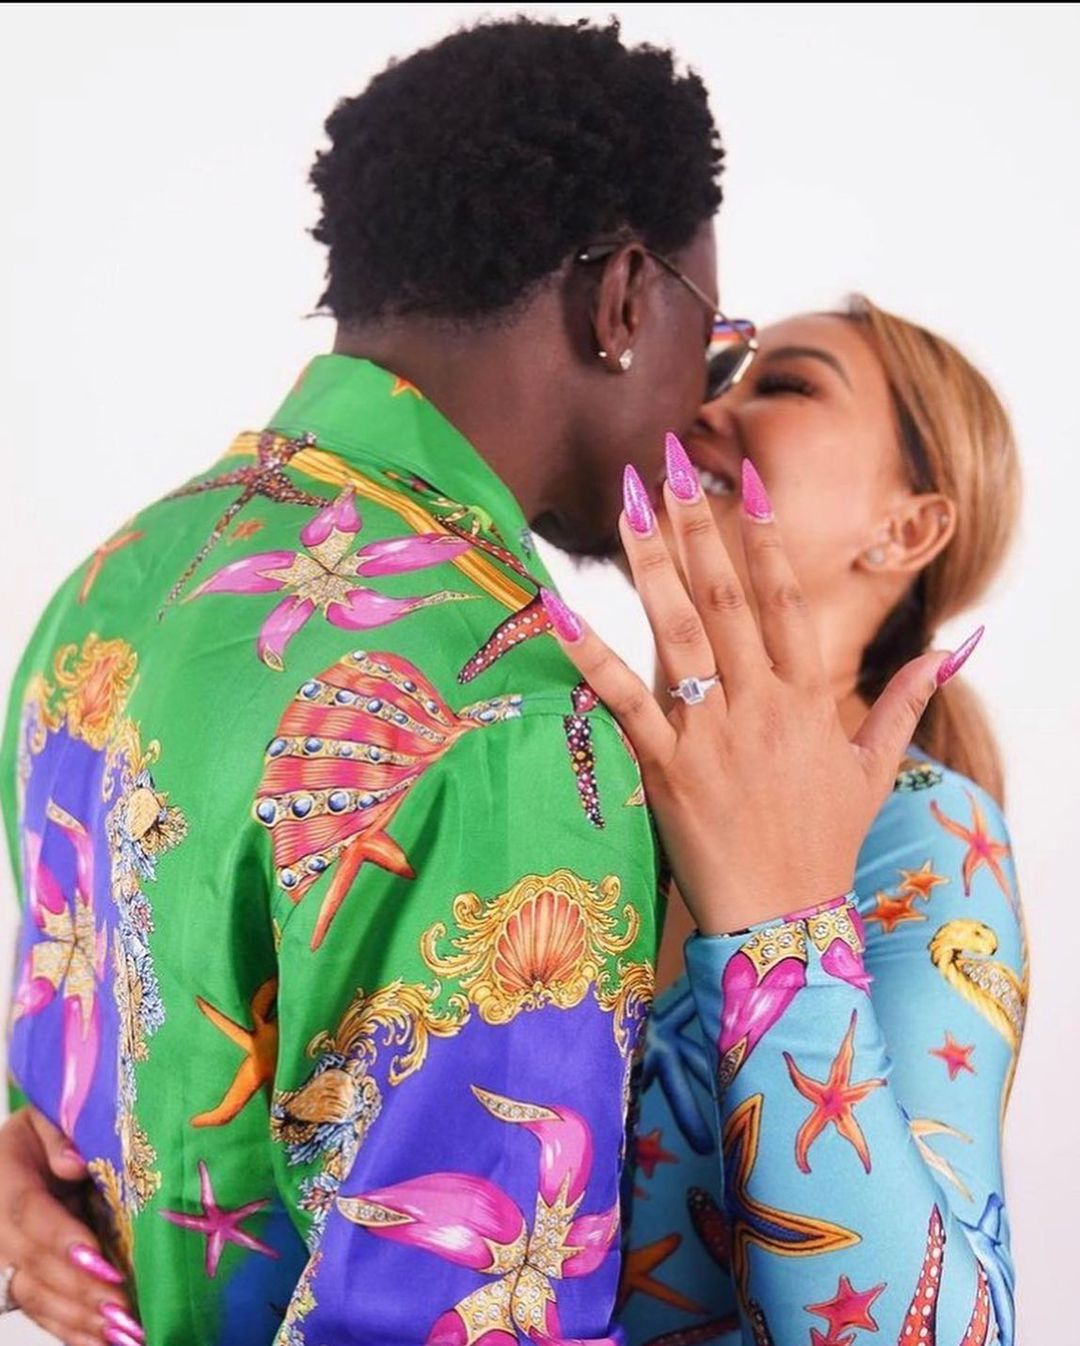 Watch moment Comedian Michael Blackson proposes to his girlfriend, Rada during a radio show (video)